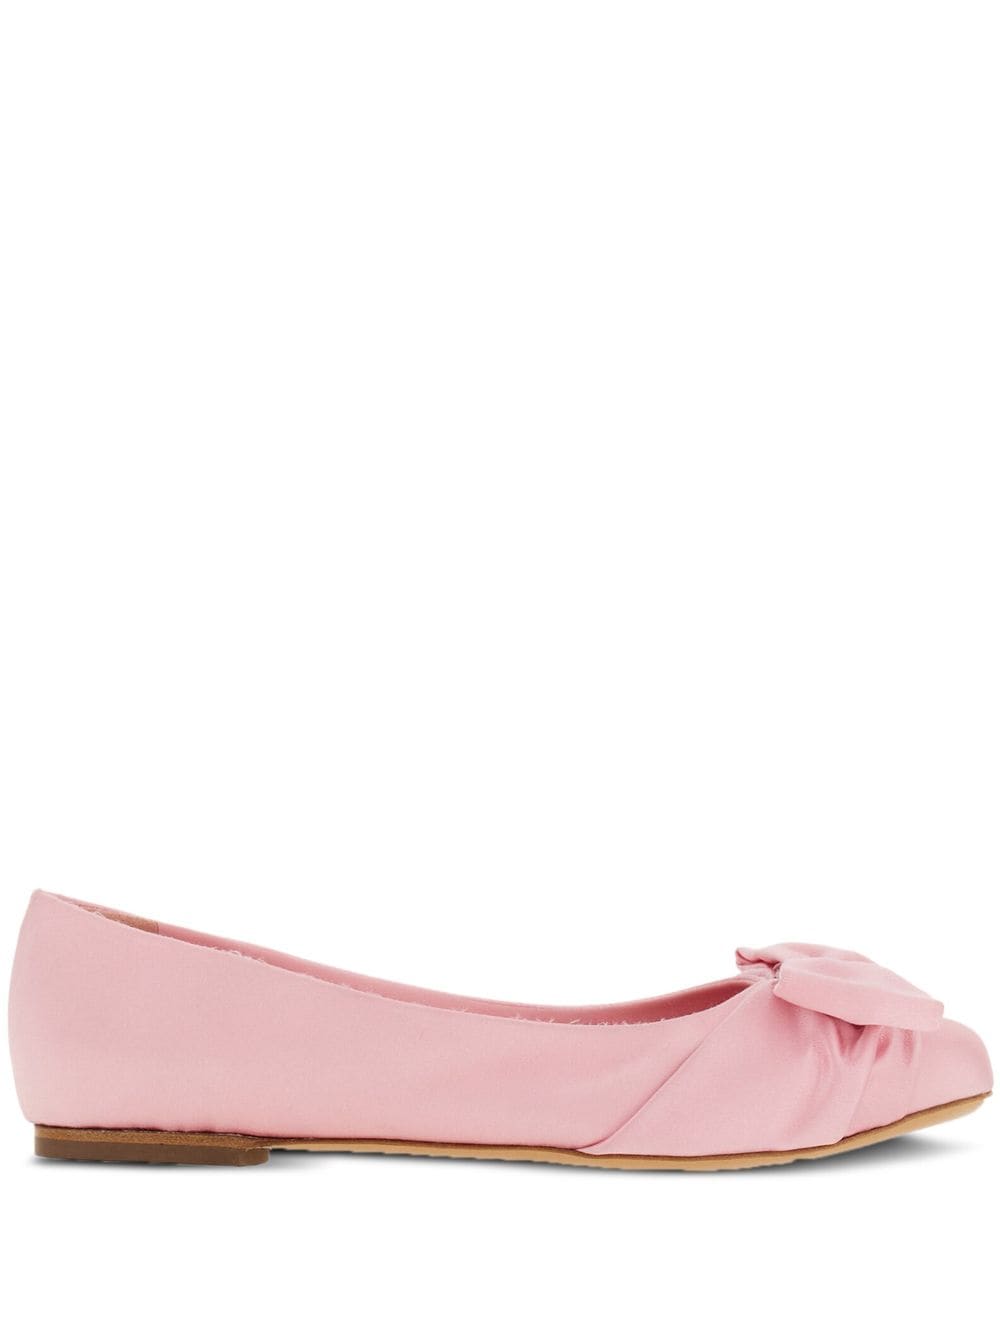 Ferragamo Vara Bow-detailing Leather Loafers In Pink